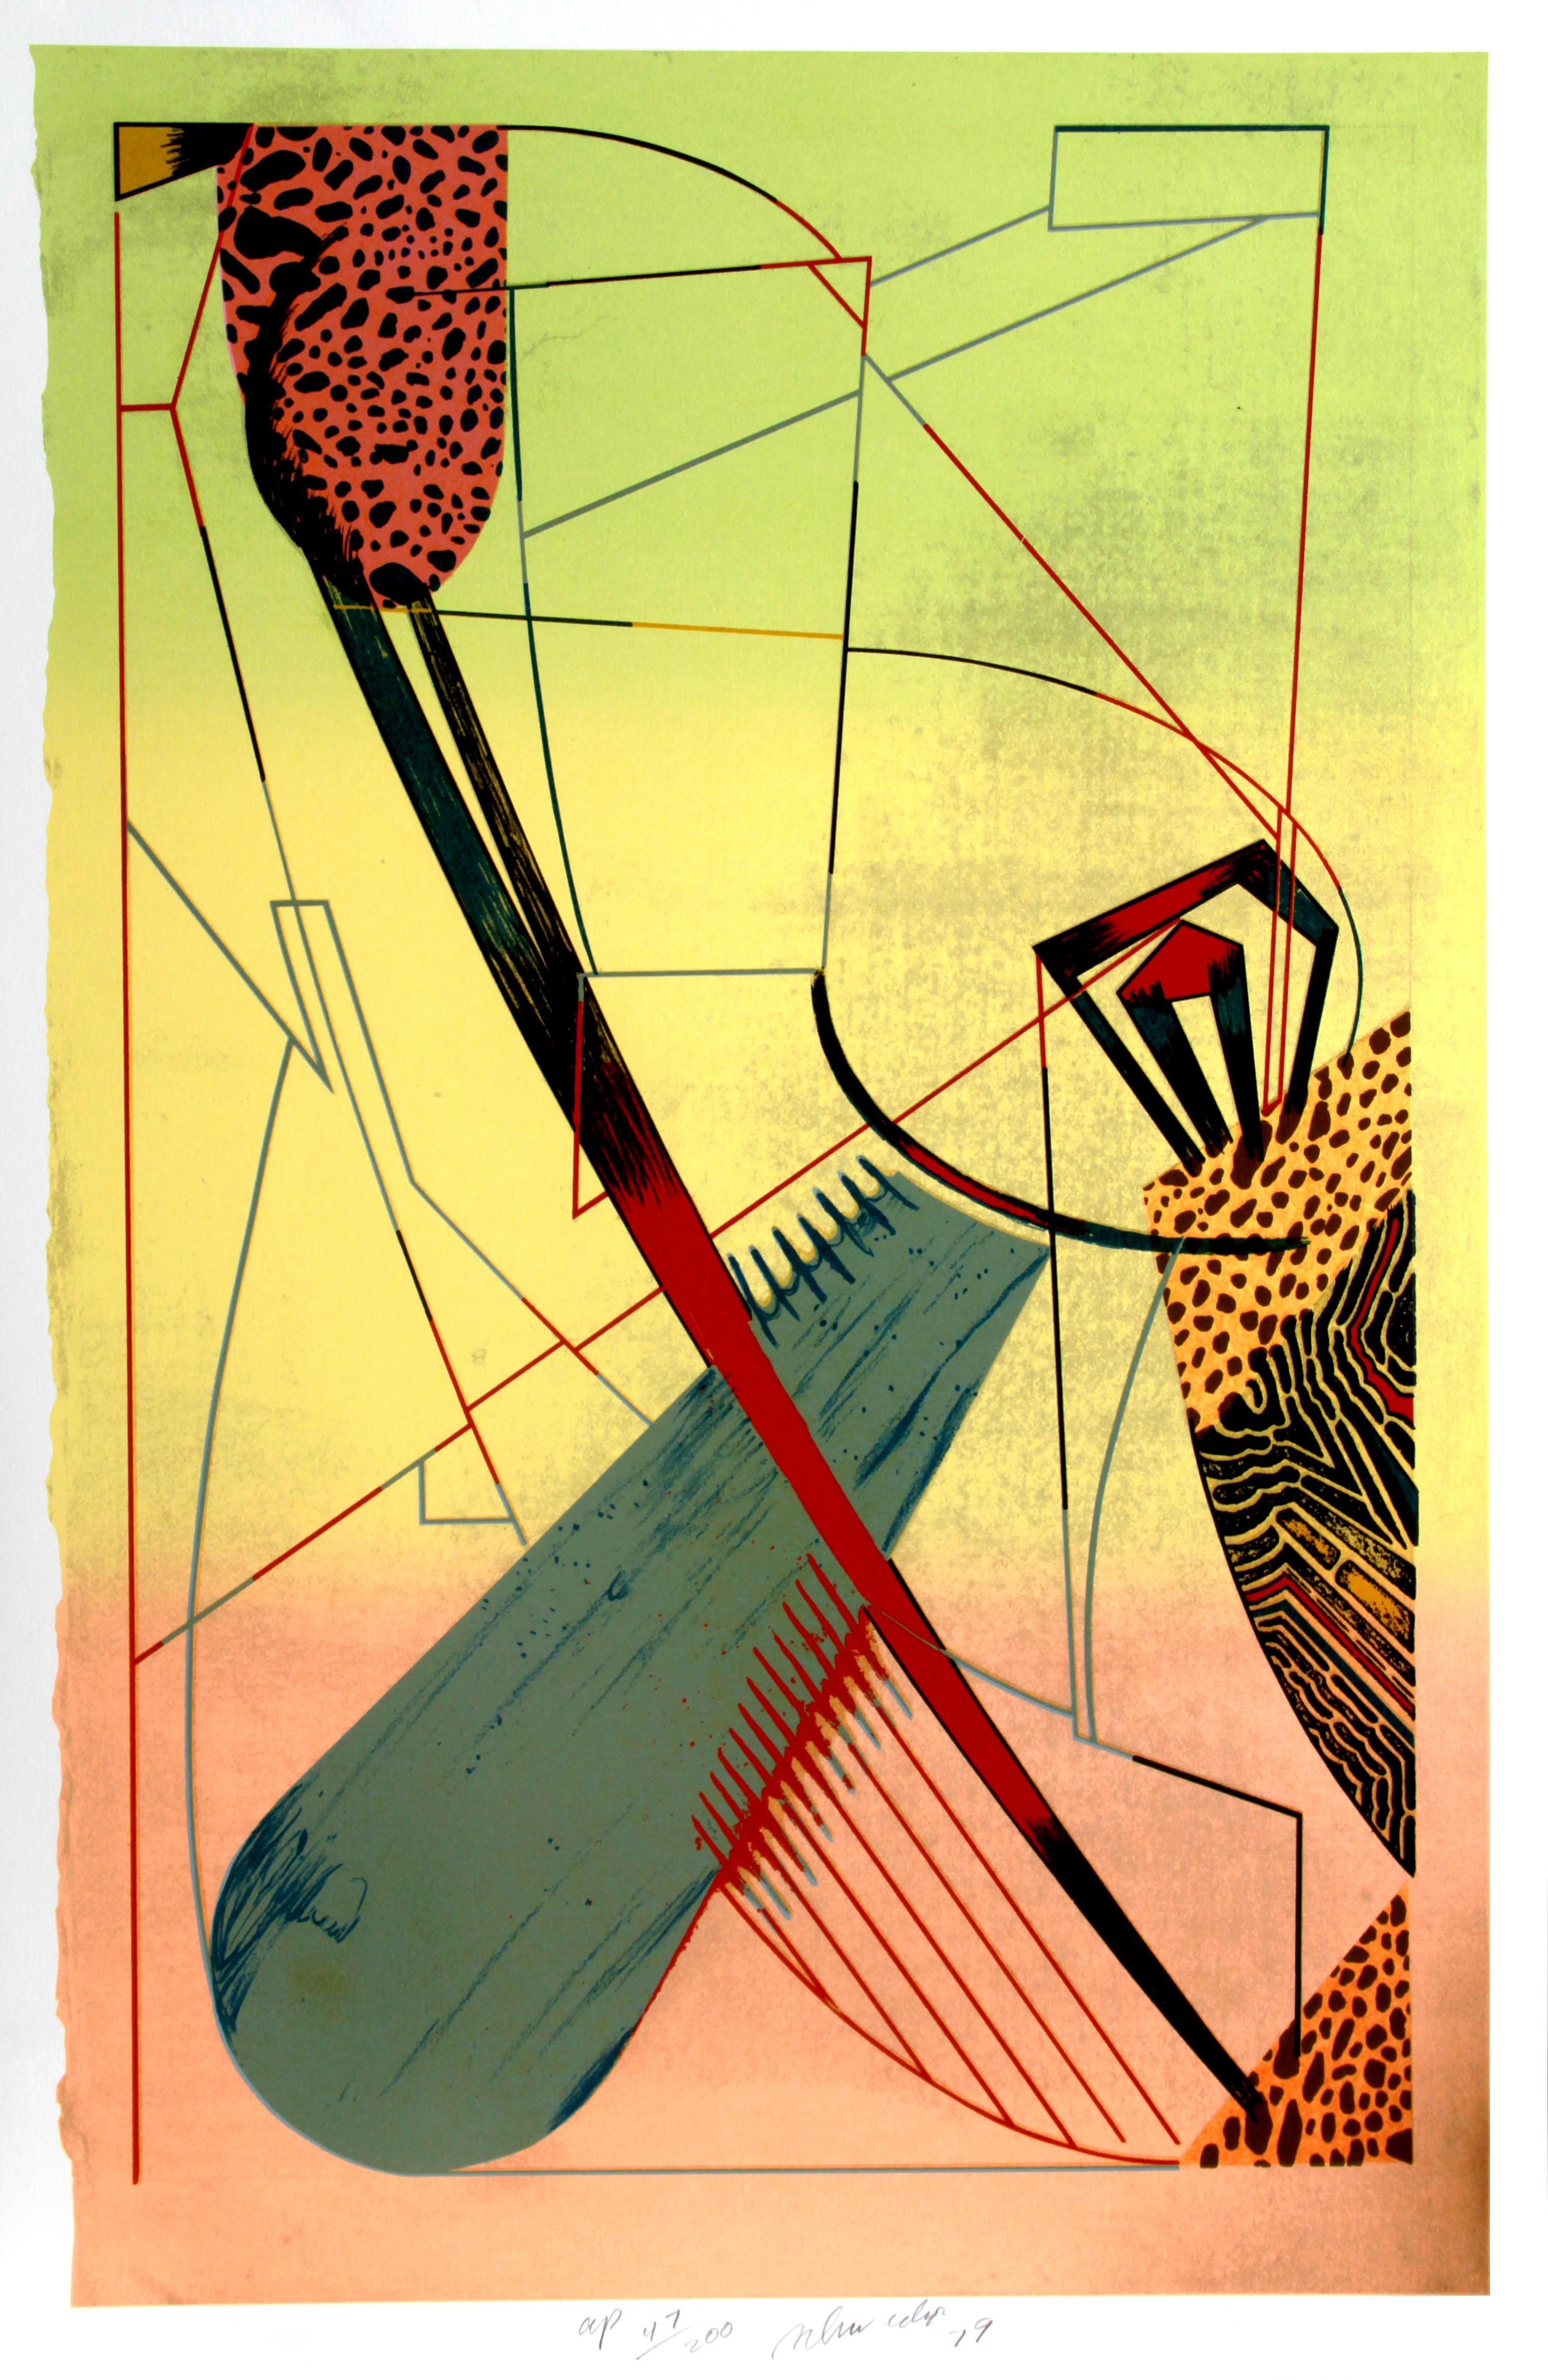 This abstract composition by William Schwedler includes several geometric forms and shapes that are placed alongside straight, angled lines.

Divided Loyalties
Artist:  William Schwedler, American (1942 - 1982)
Date: 1979
Screenprint, signed and